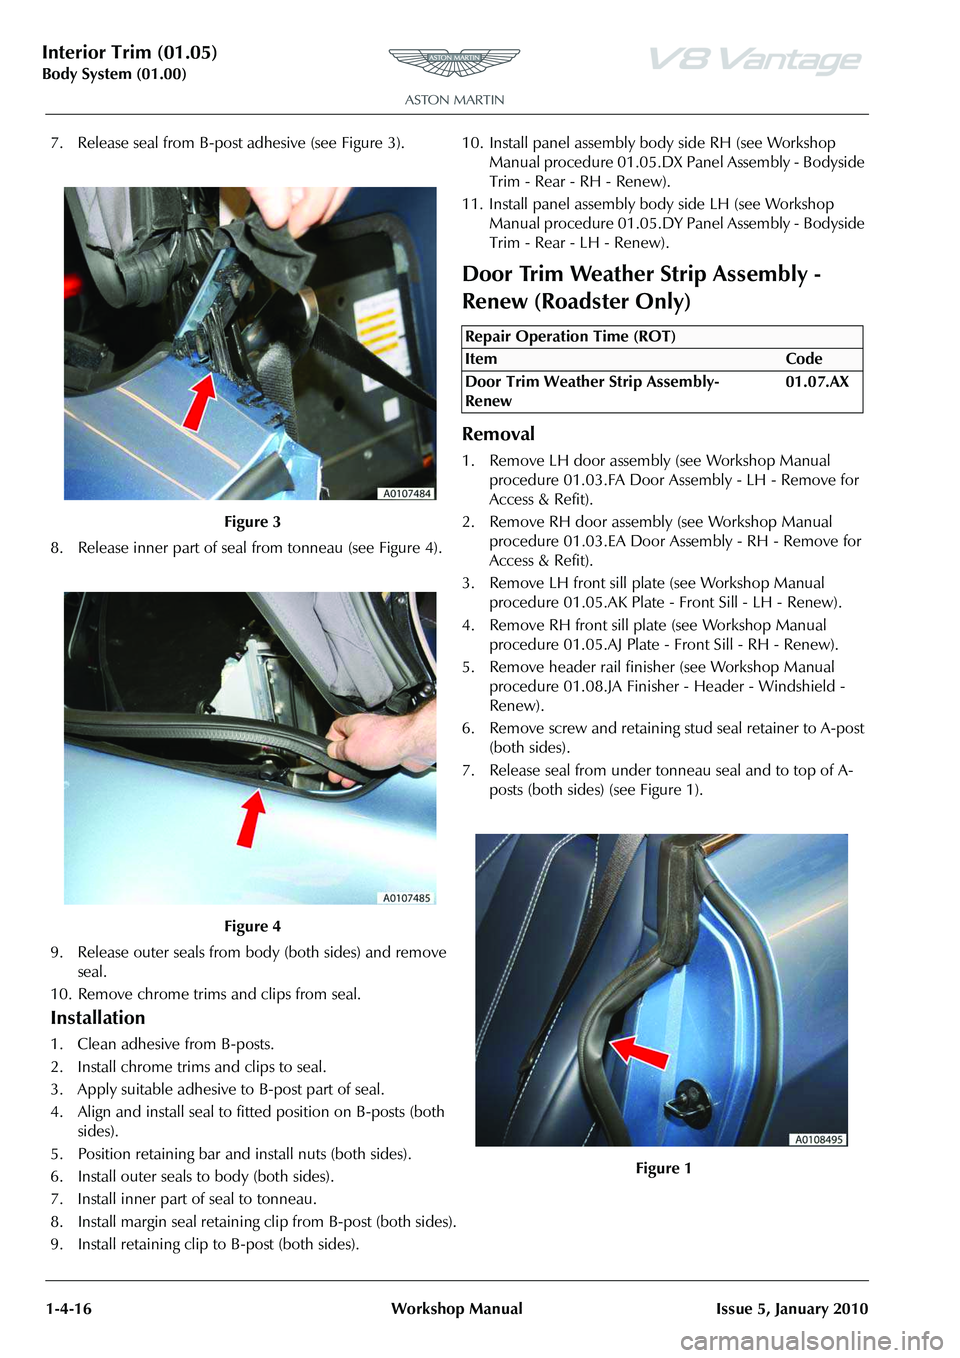 ASTON MARTIN V8 VANTAGE 2010  Workshop Manual Interior Trim (01.05)
Body System (01.00)1-4-16 Workshop Manual Issue 5, January 2010
7. Release seal from B-post  adhesive (see Figure 3).
8. Release inner part of seal  from tonneau (see Figure 4).
